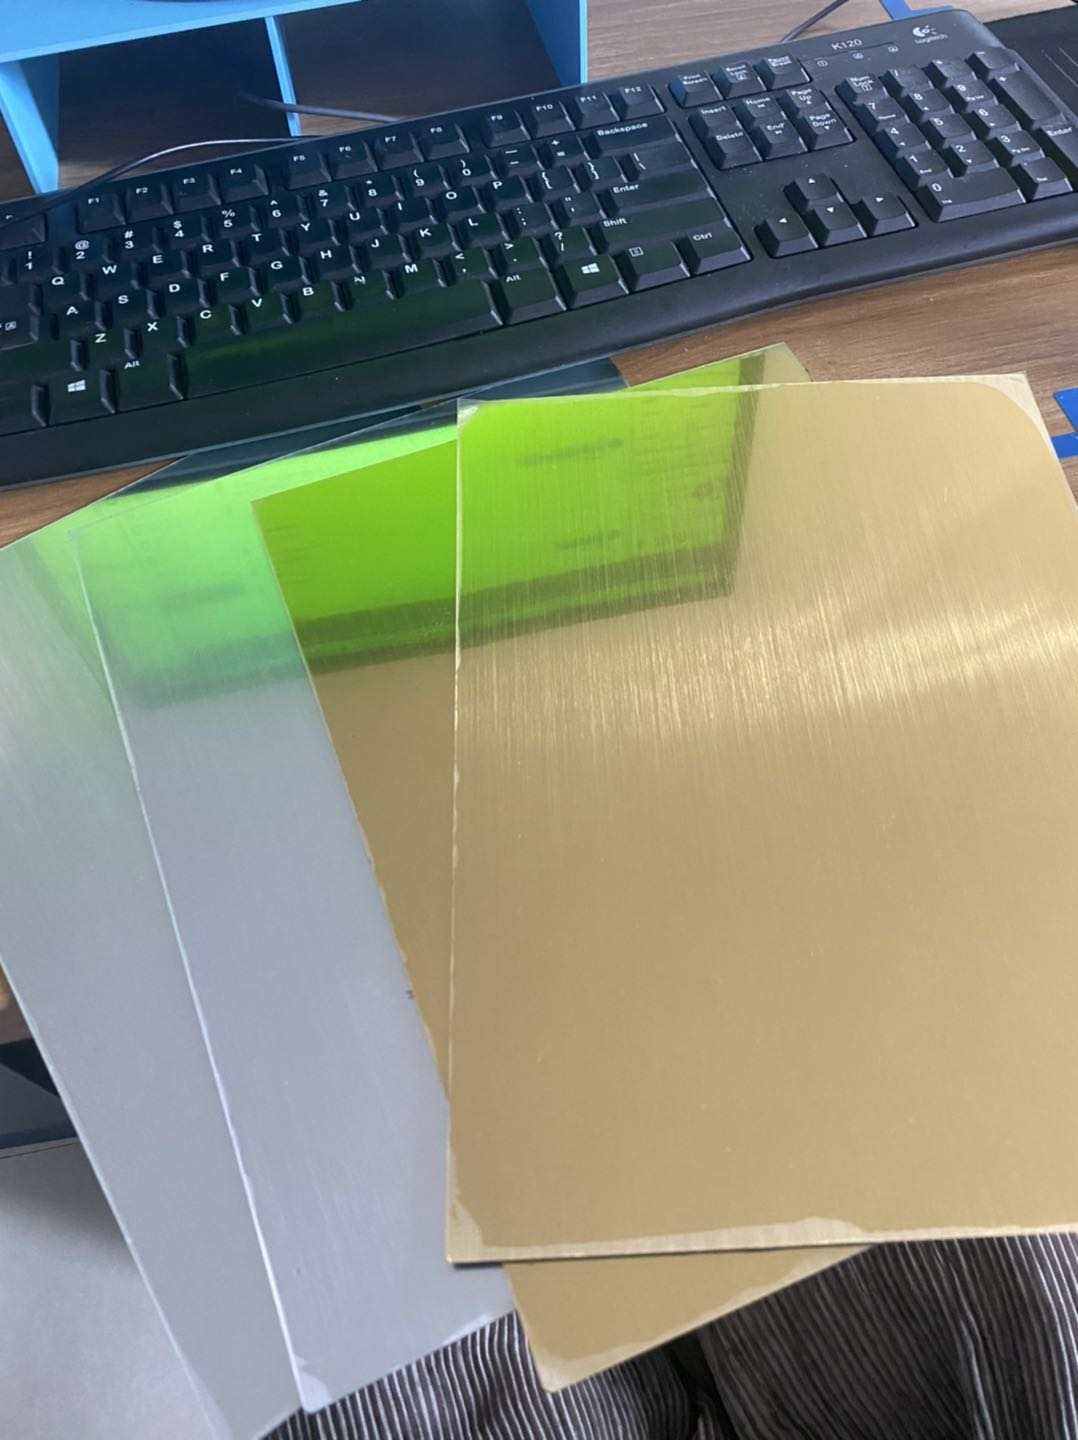 Paidu ABS sheets Gold color laser engraving plastic sheets Brushed mirror 1200x600 double colored